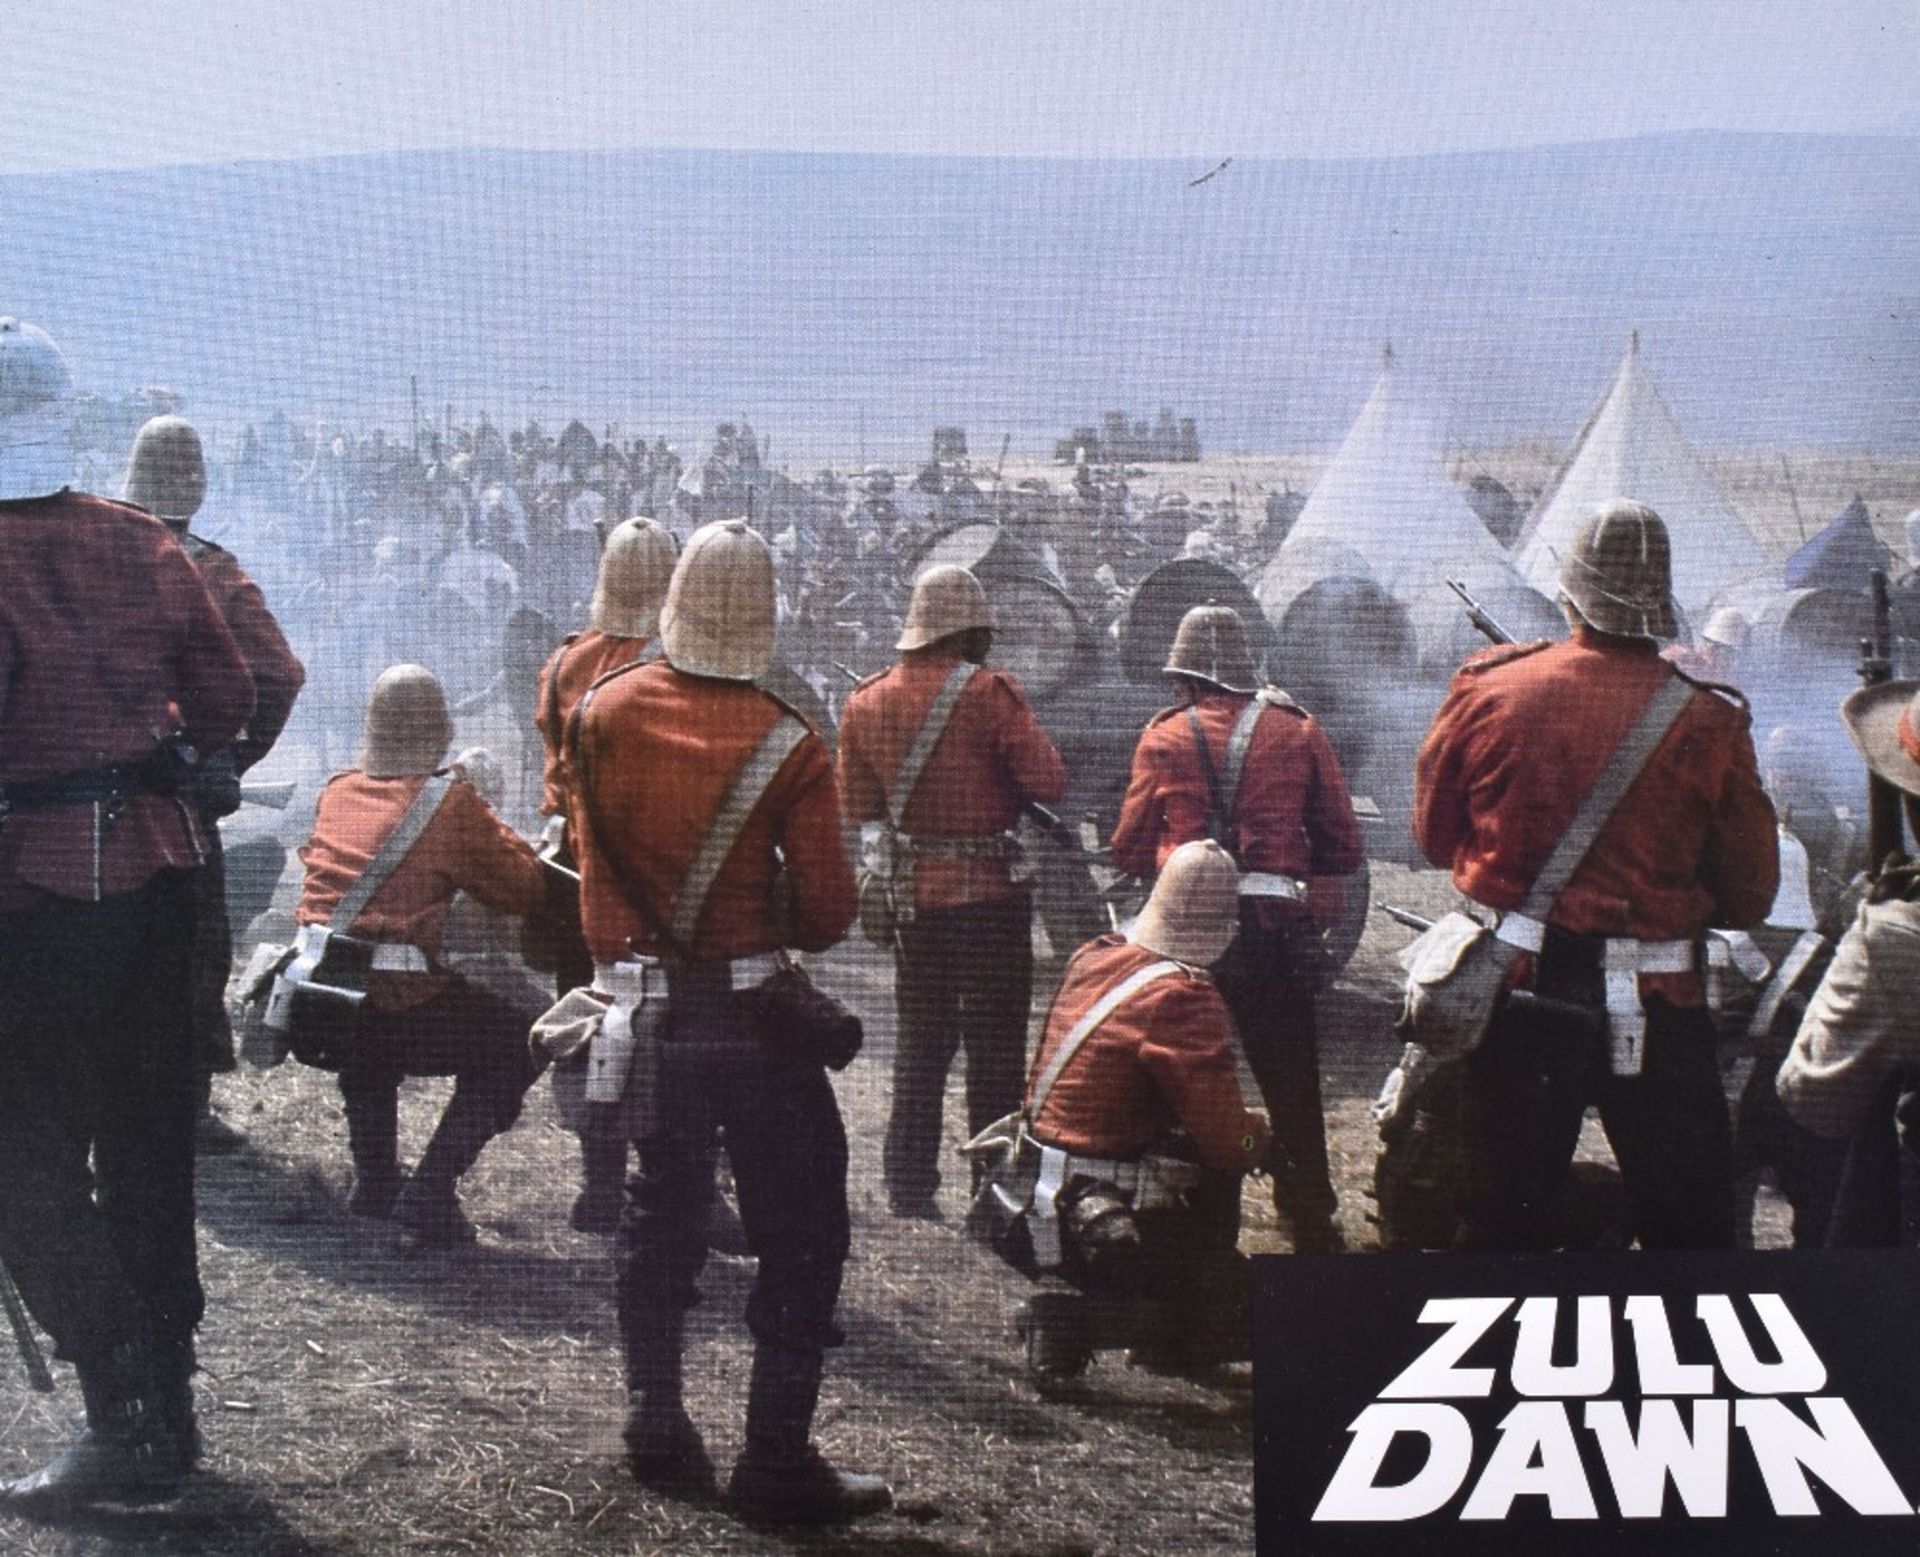 10x Front of House / Lobby Cards for the Motion Picture Zulu Dawn (1979) - Image 3 of 3